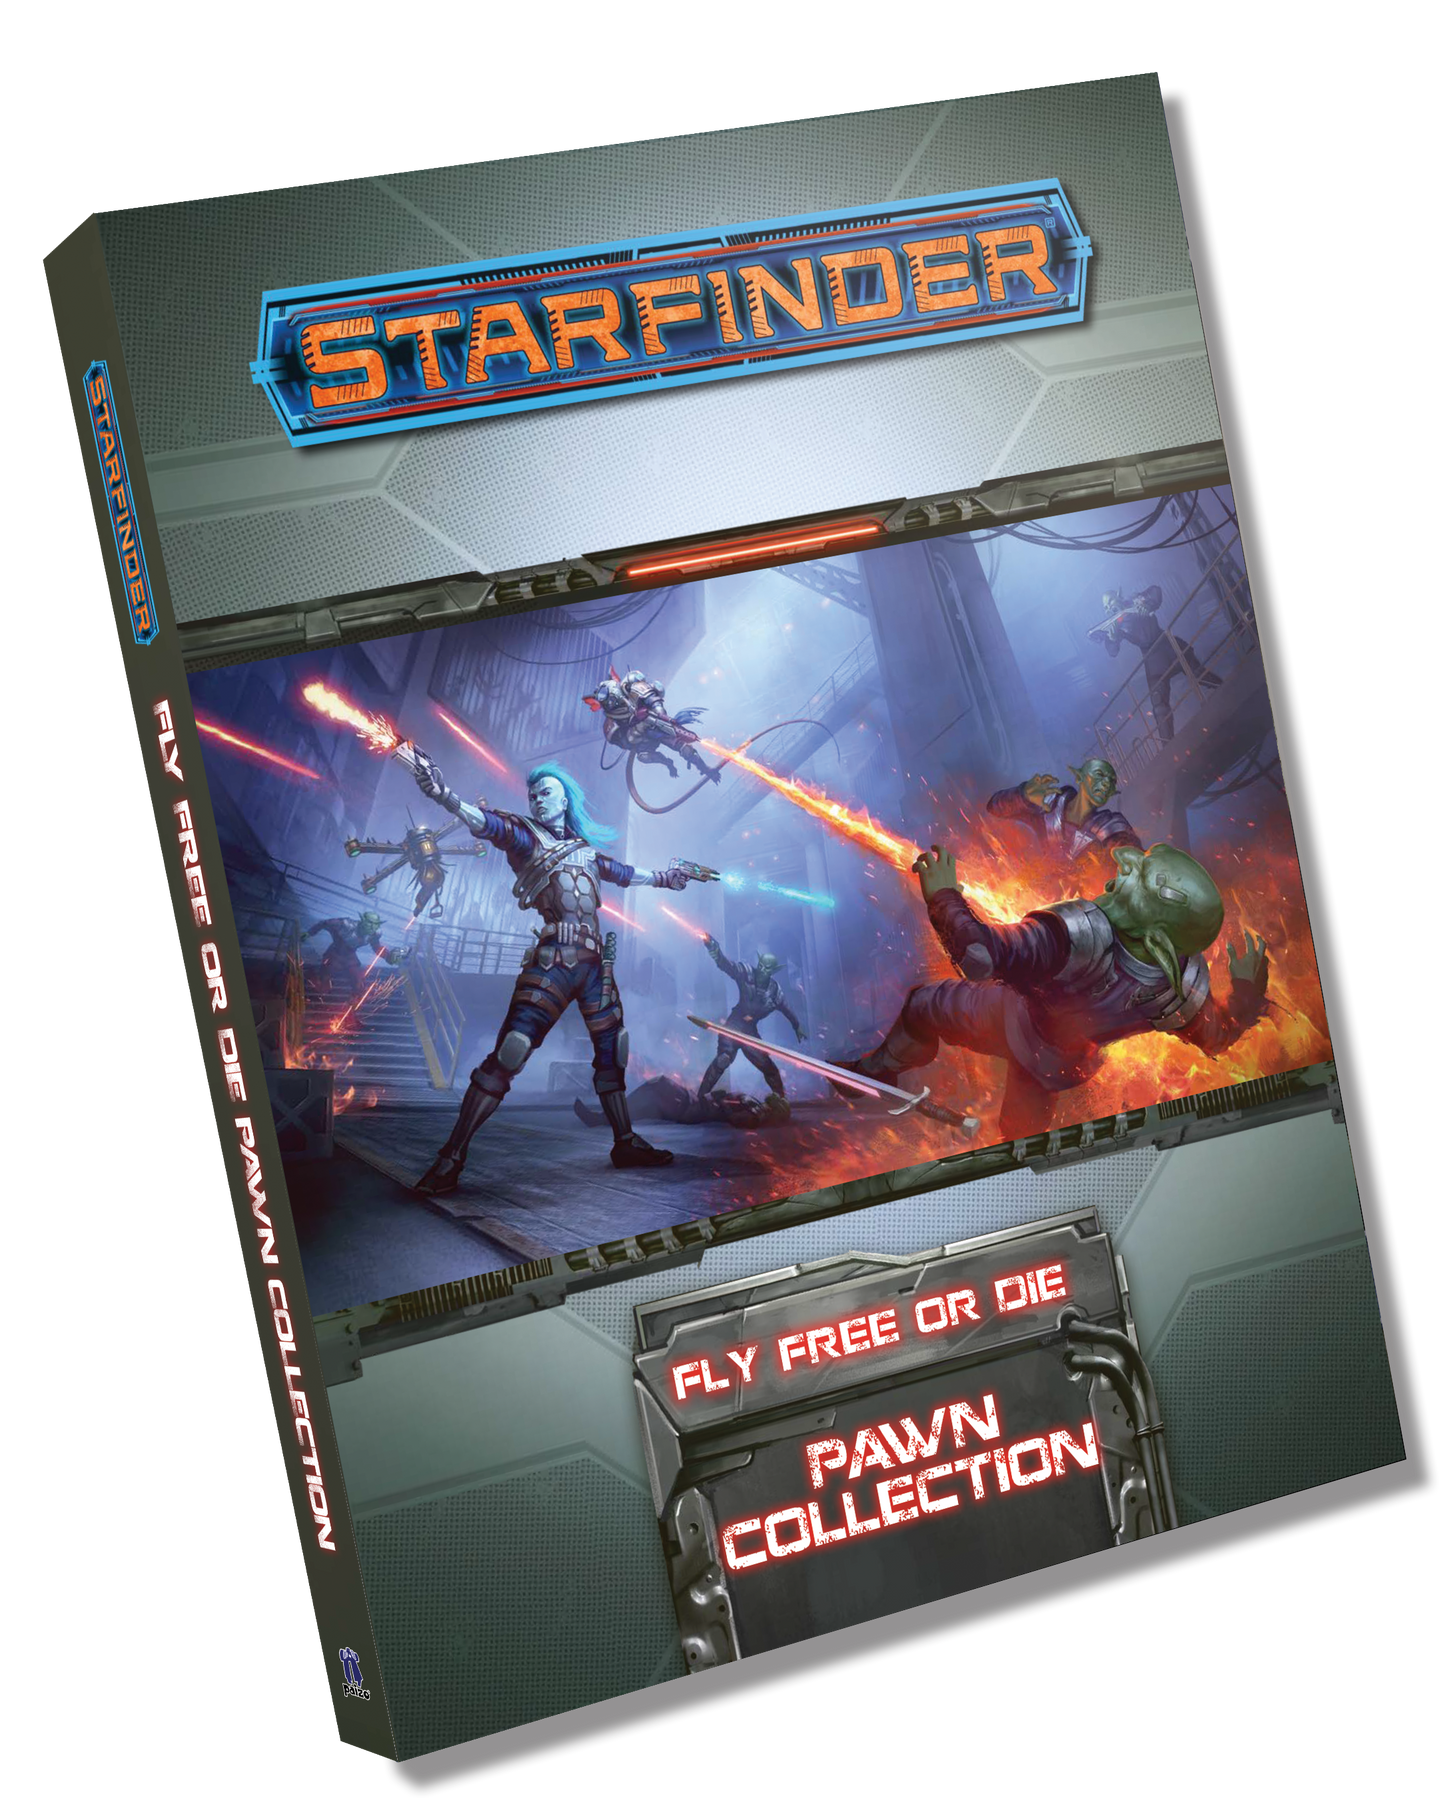 STARFINDER FLY FREE OR DIE PAWN COLLECTION